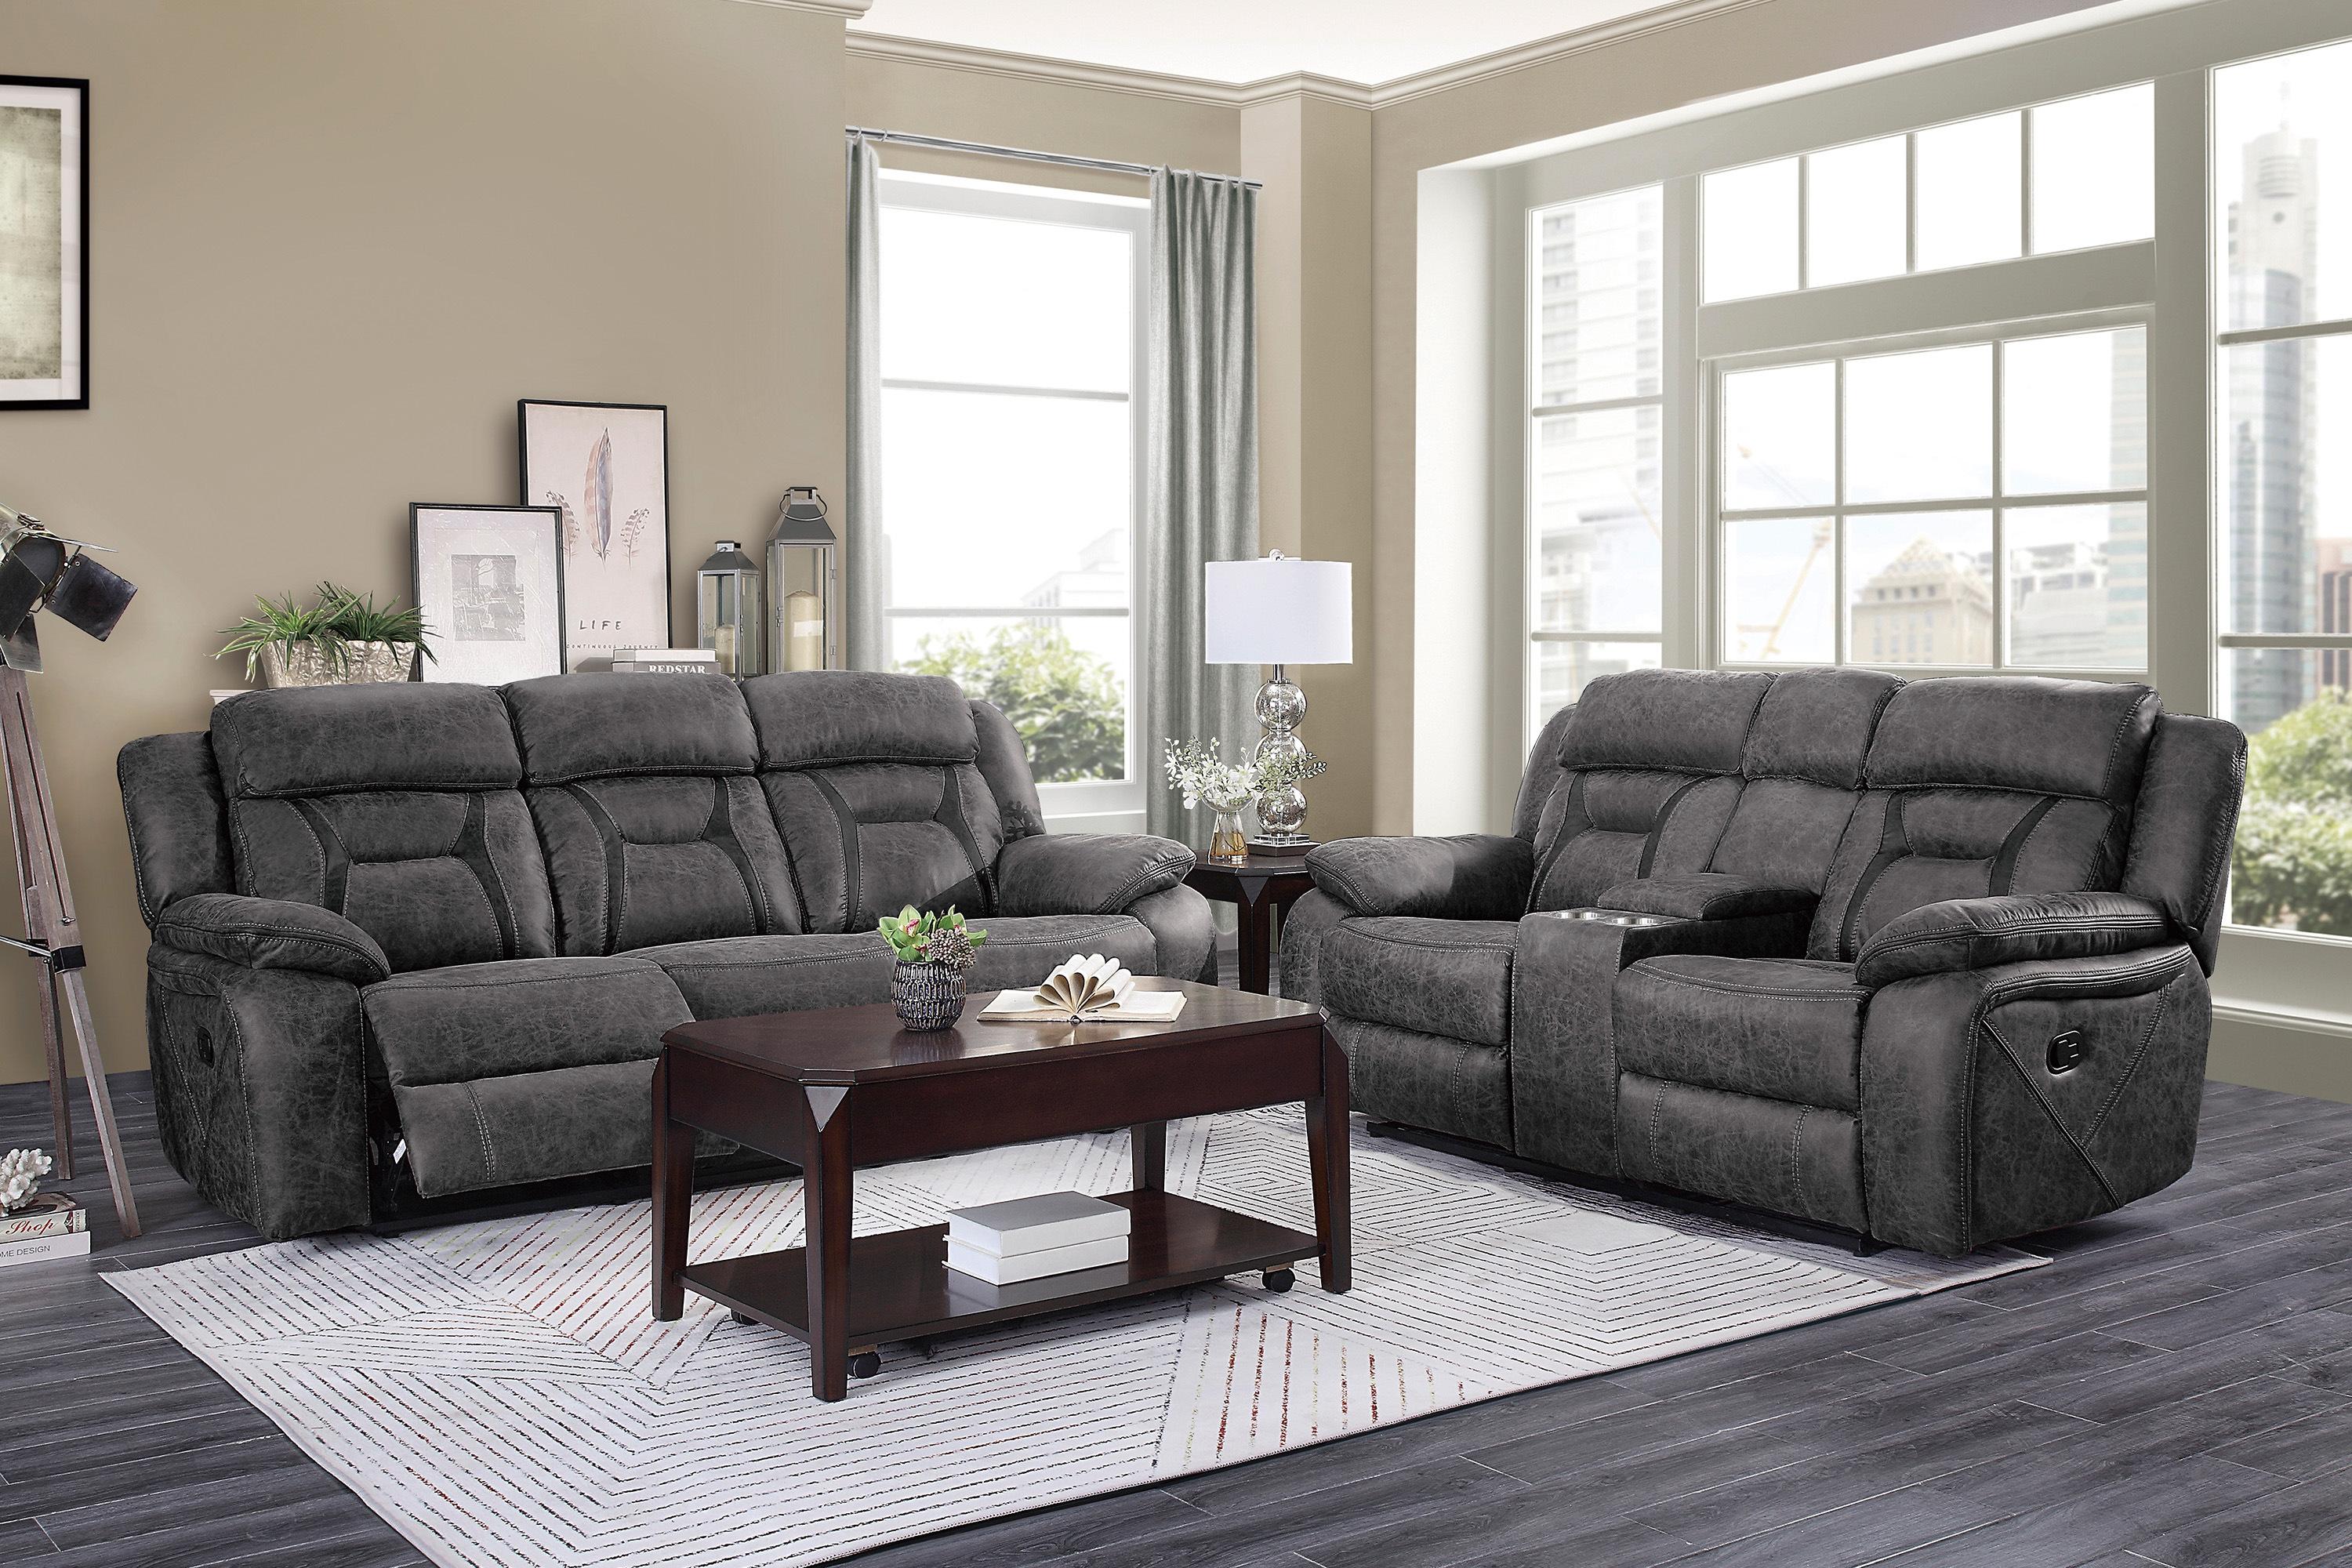 Homelegance 9989GY-2PC Madrona Hill Reclining Set